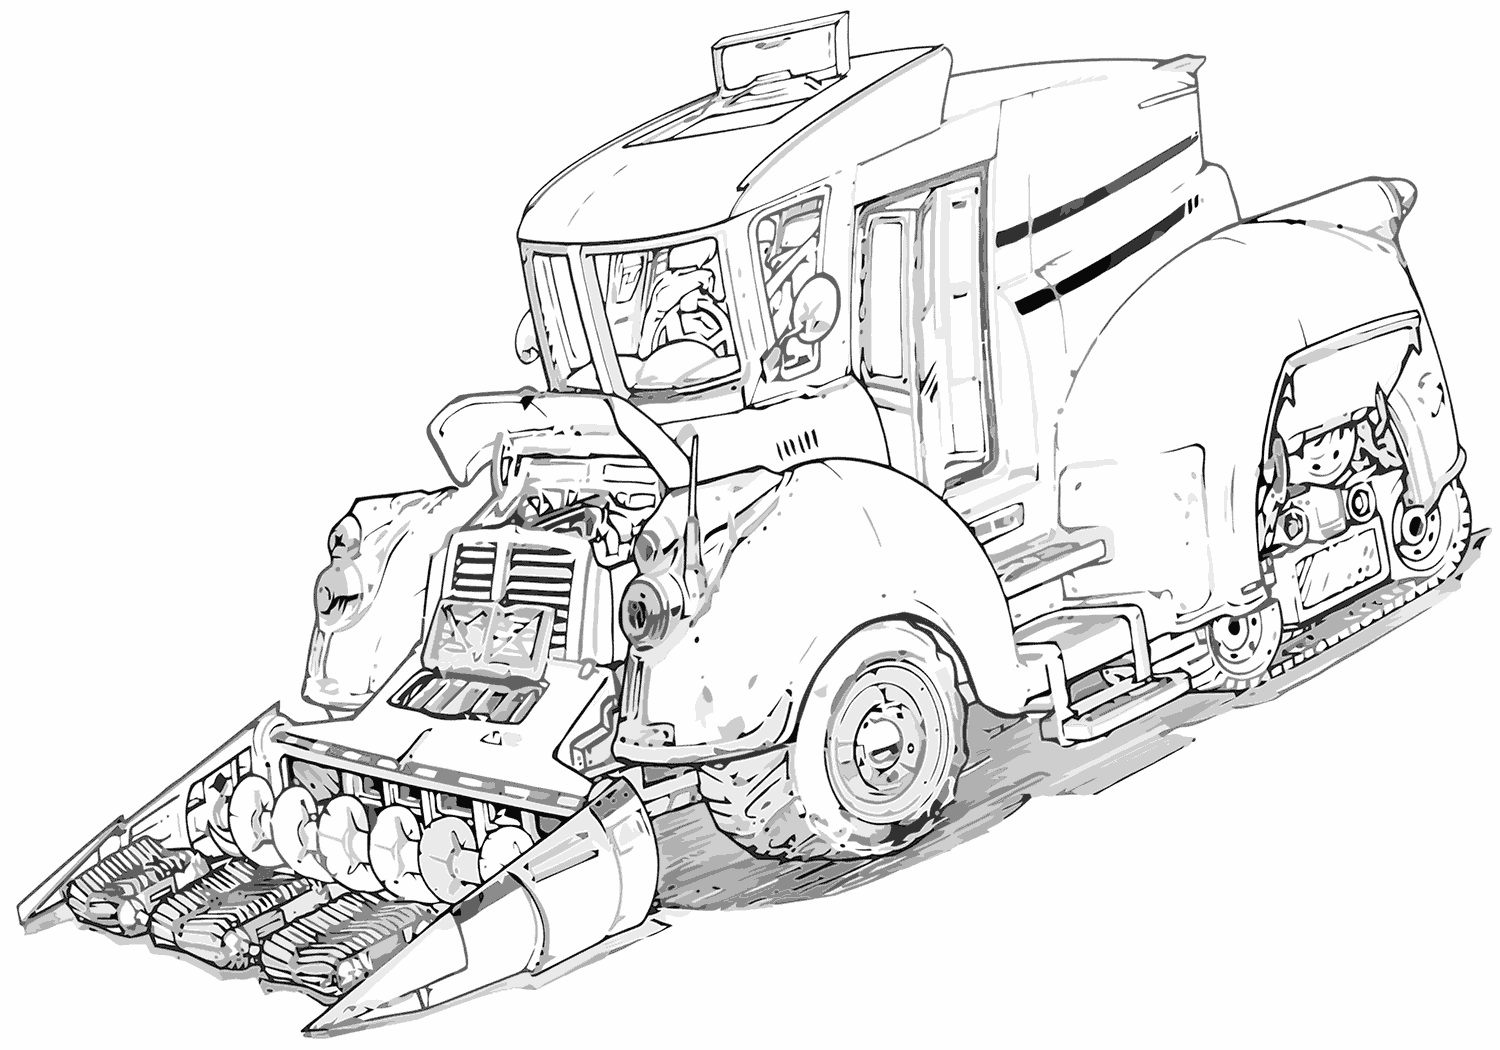 combine harvester colouring pages combine harvester coloring pages coloring pages to combine harvester pages colouring 